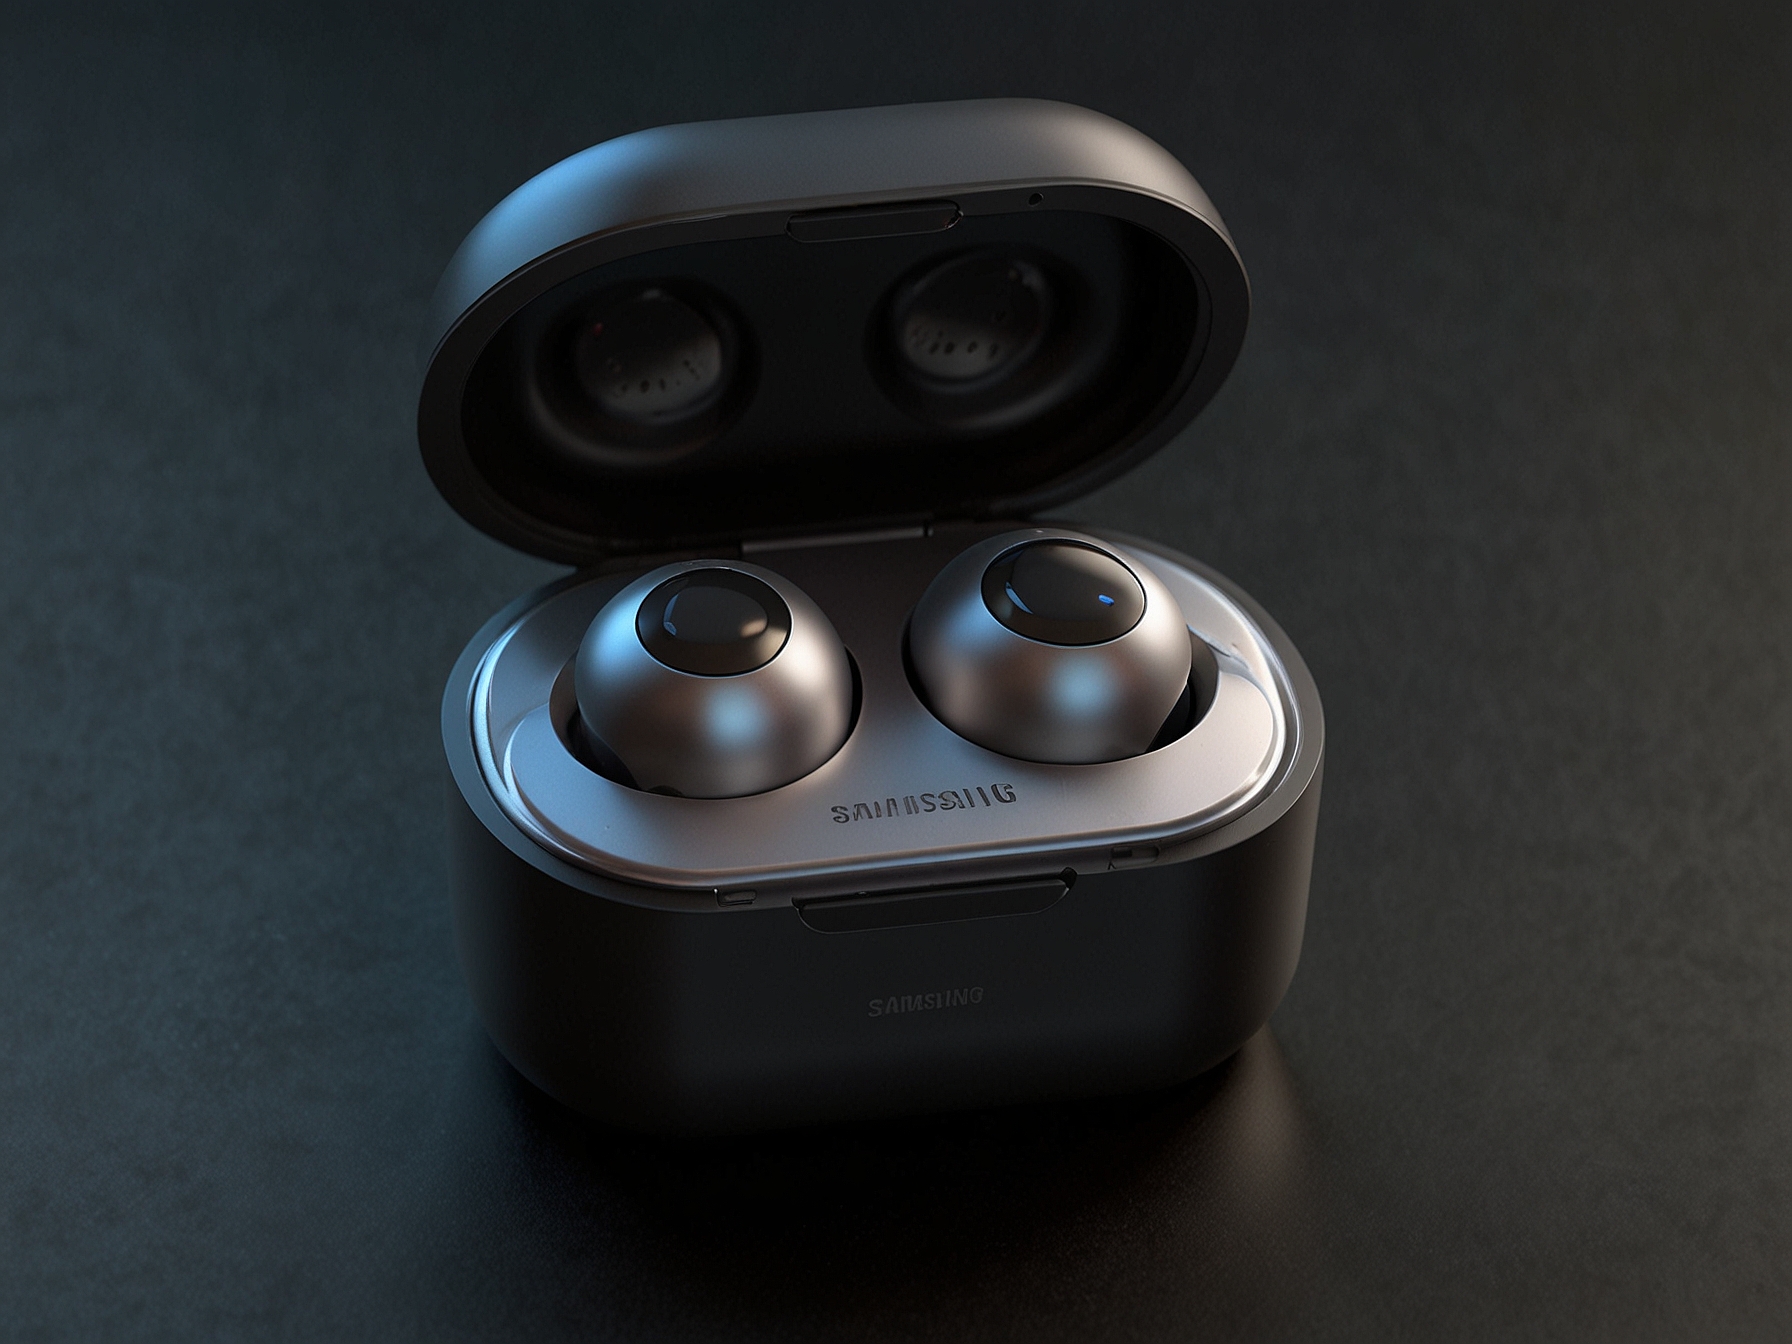 A rendering of the Samsung Galaxy Ring in its charging case, demonstrating the convenience and protection offered by the case, inspired by the design of Samsung's Galaxy Buds charging cases.